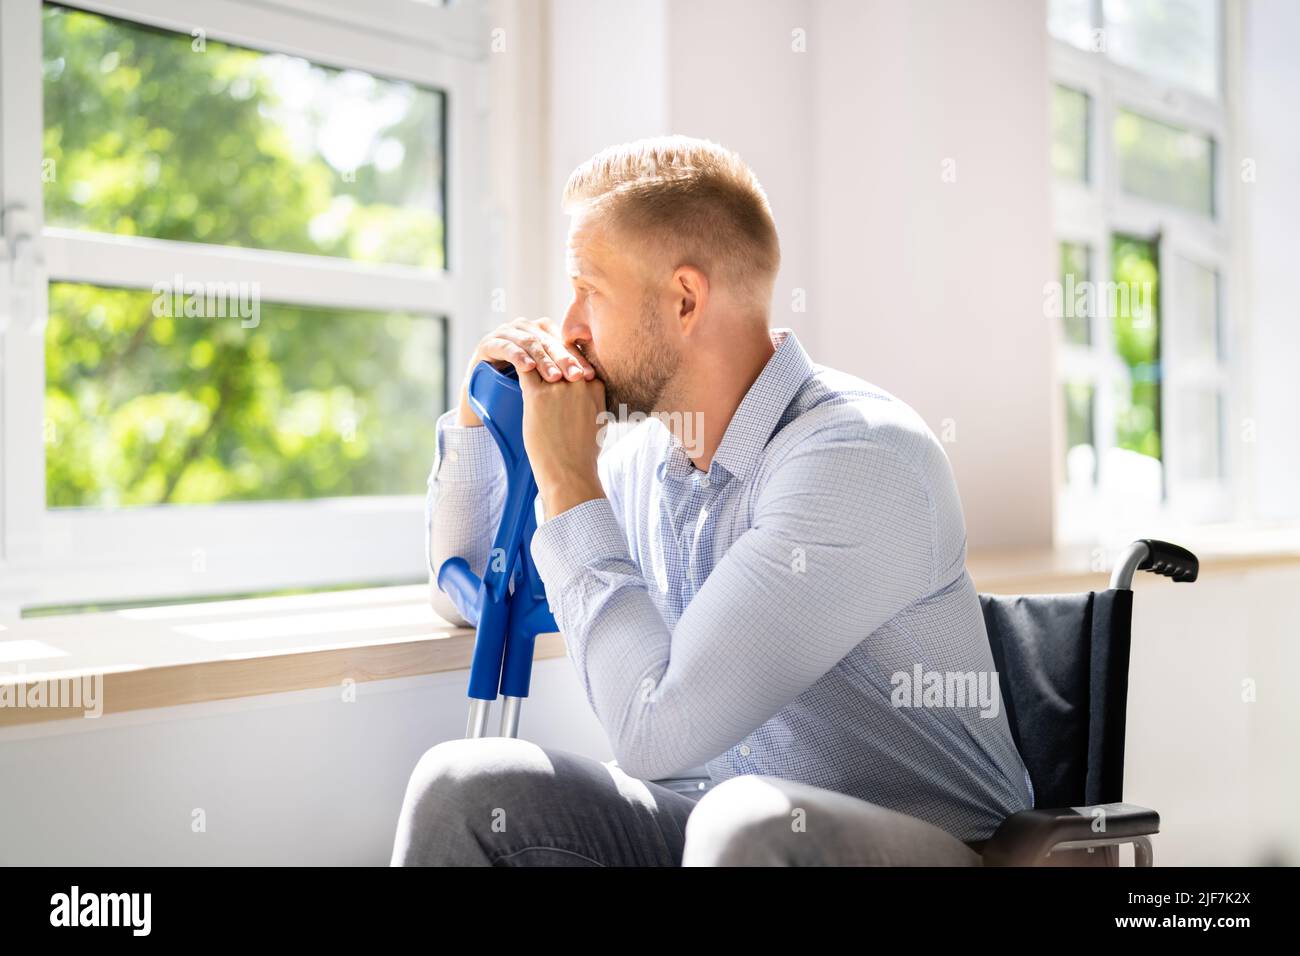 Disabled Man Difficulties. Big Accident Depression. Crutches And Wheelchair Stock Photo